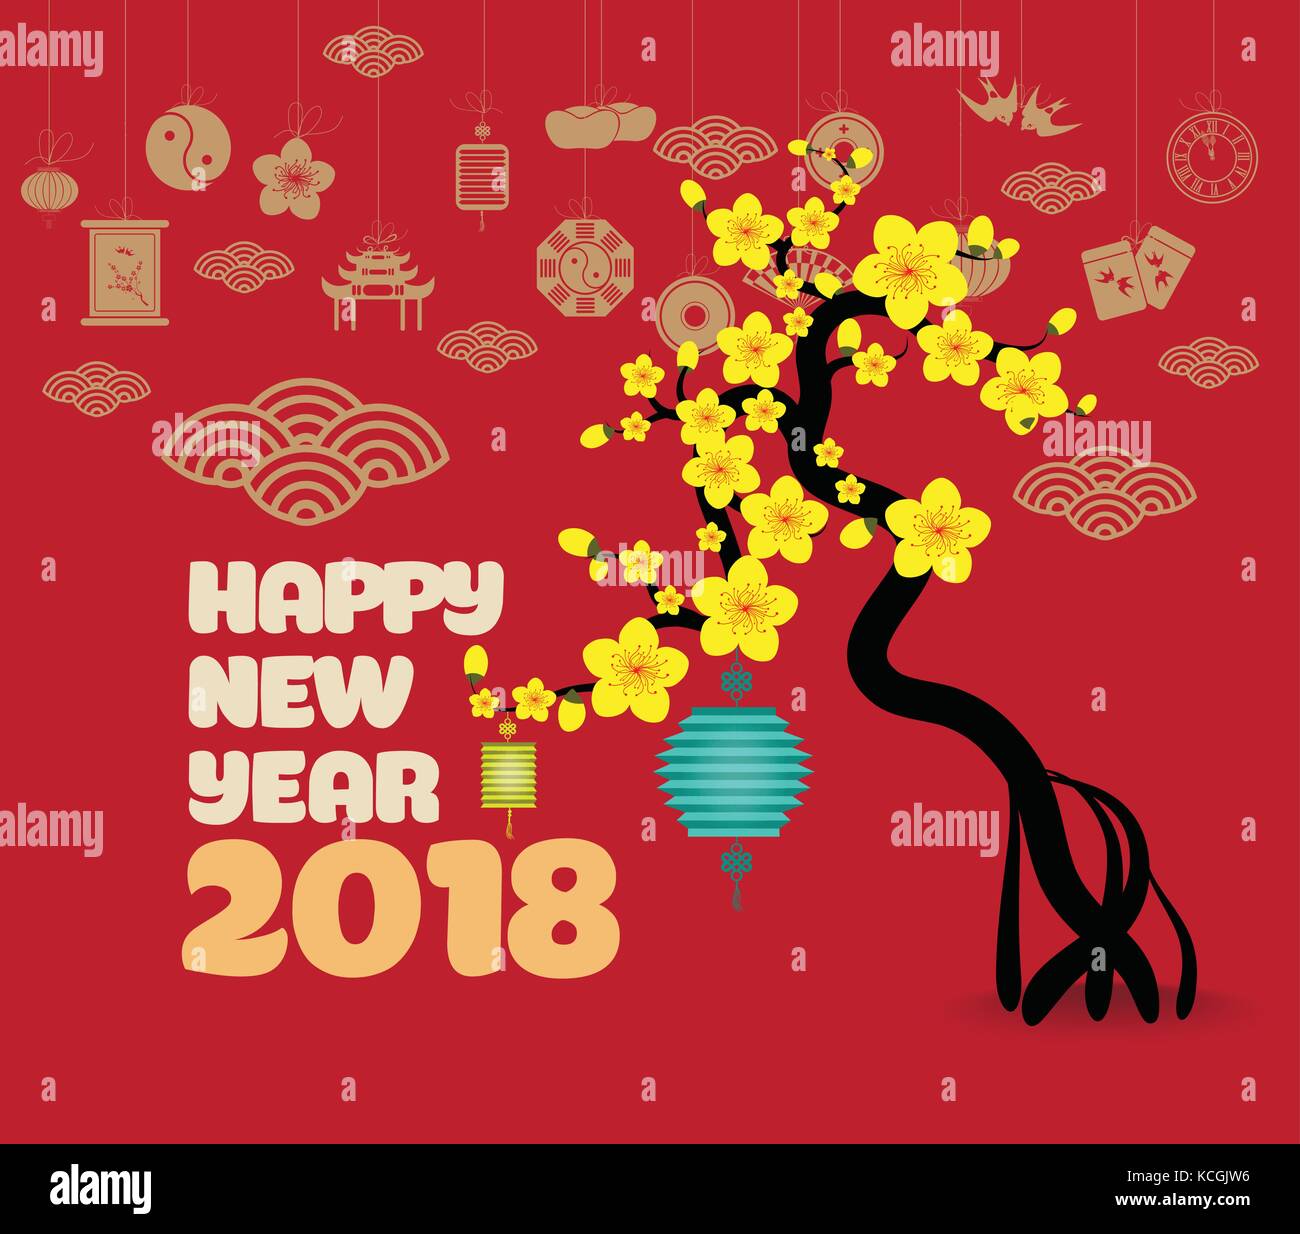 Chinese new year with blossom and lantern Stock Vector